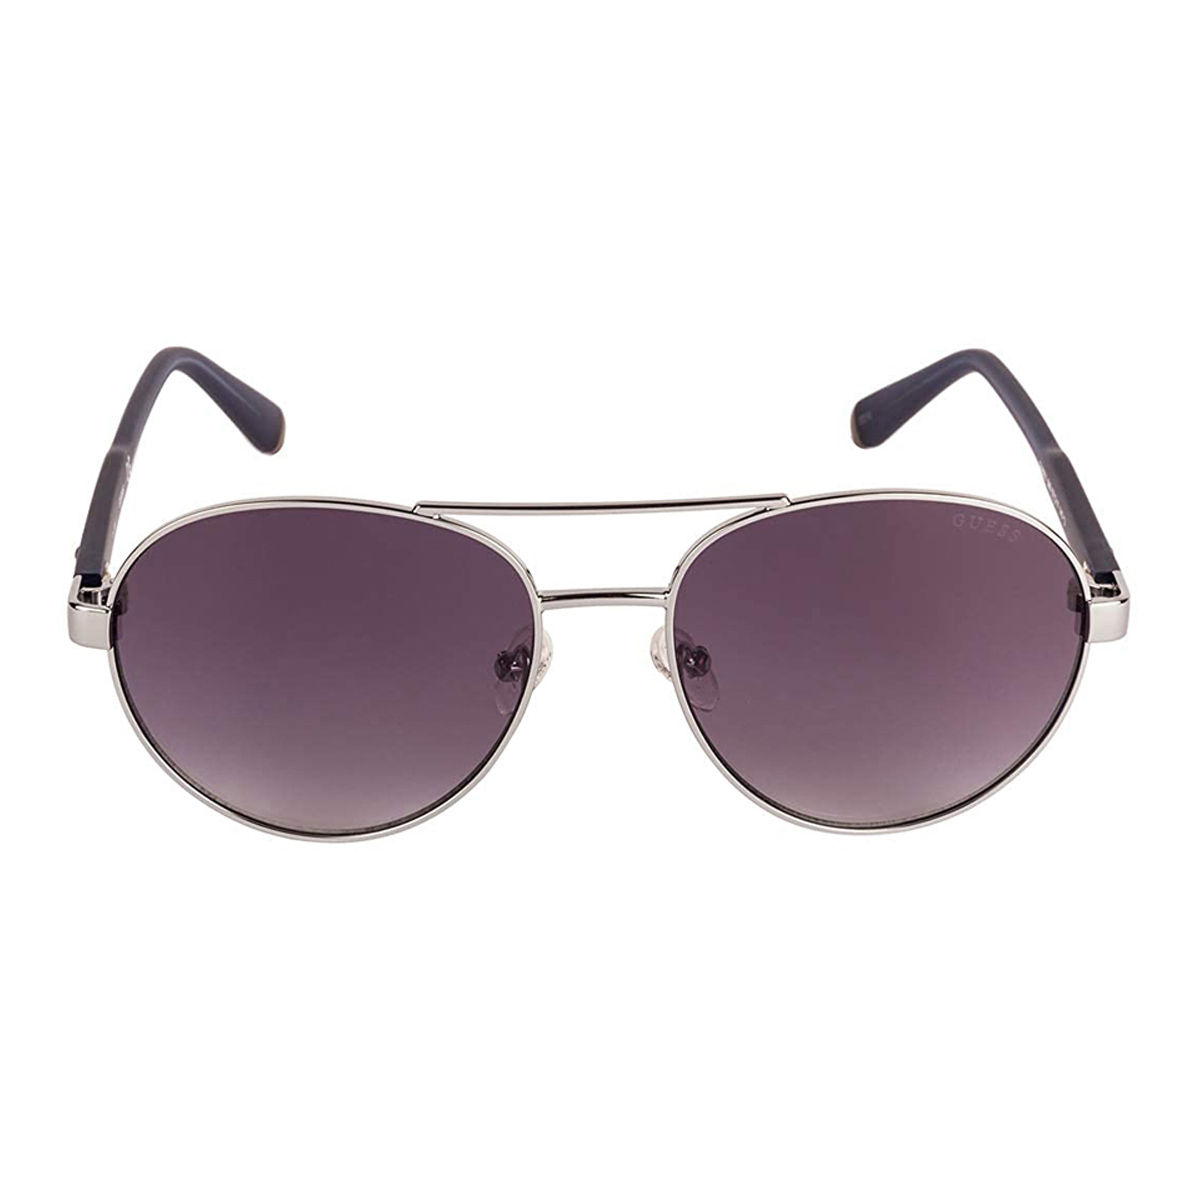 Guess Sunglasses Round With Grey Lens For Men